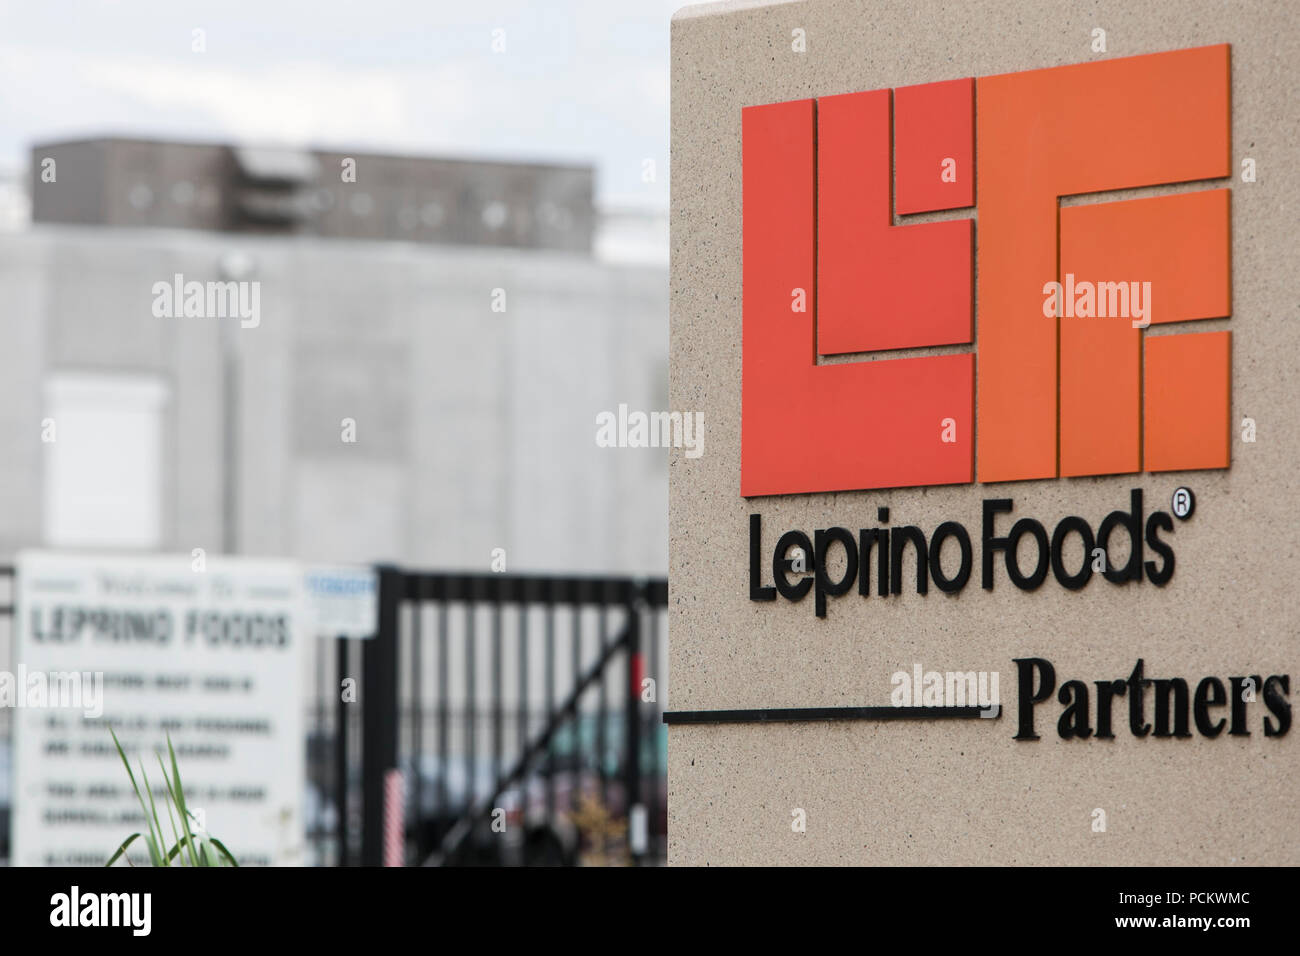 A logo sign outside of a facility occupied by Leprino Foods in Greely, Colorado, on July 21, 2018. Stock Photo